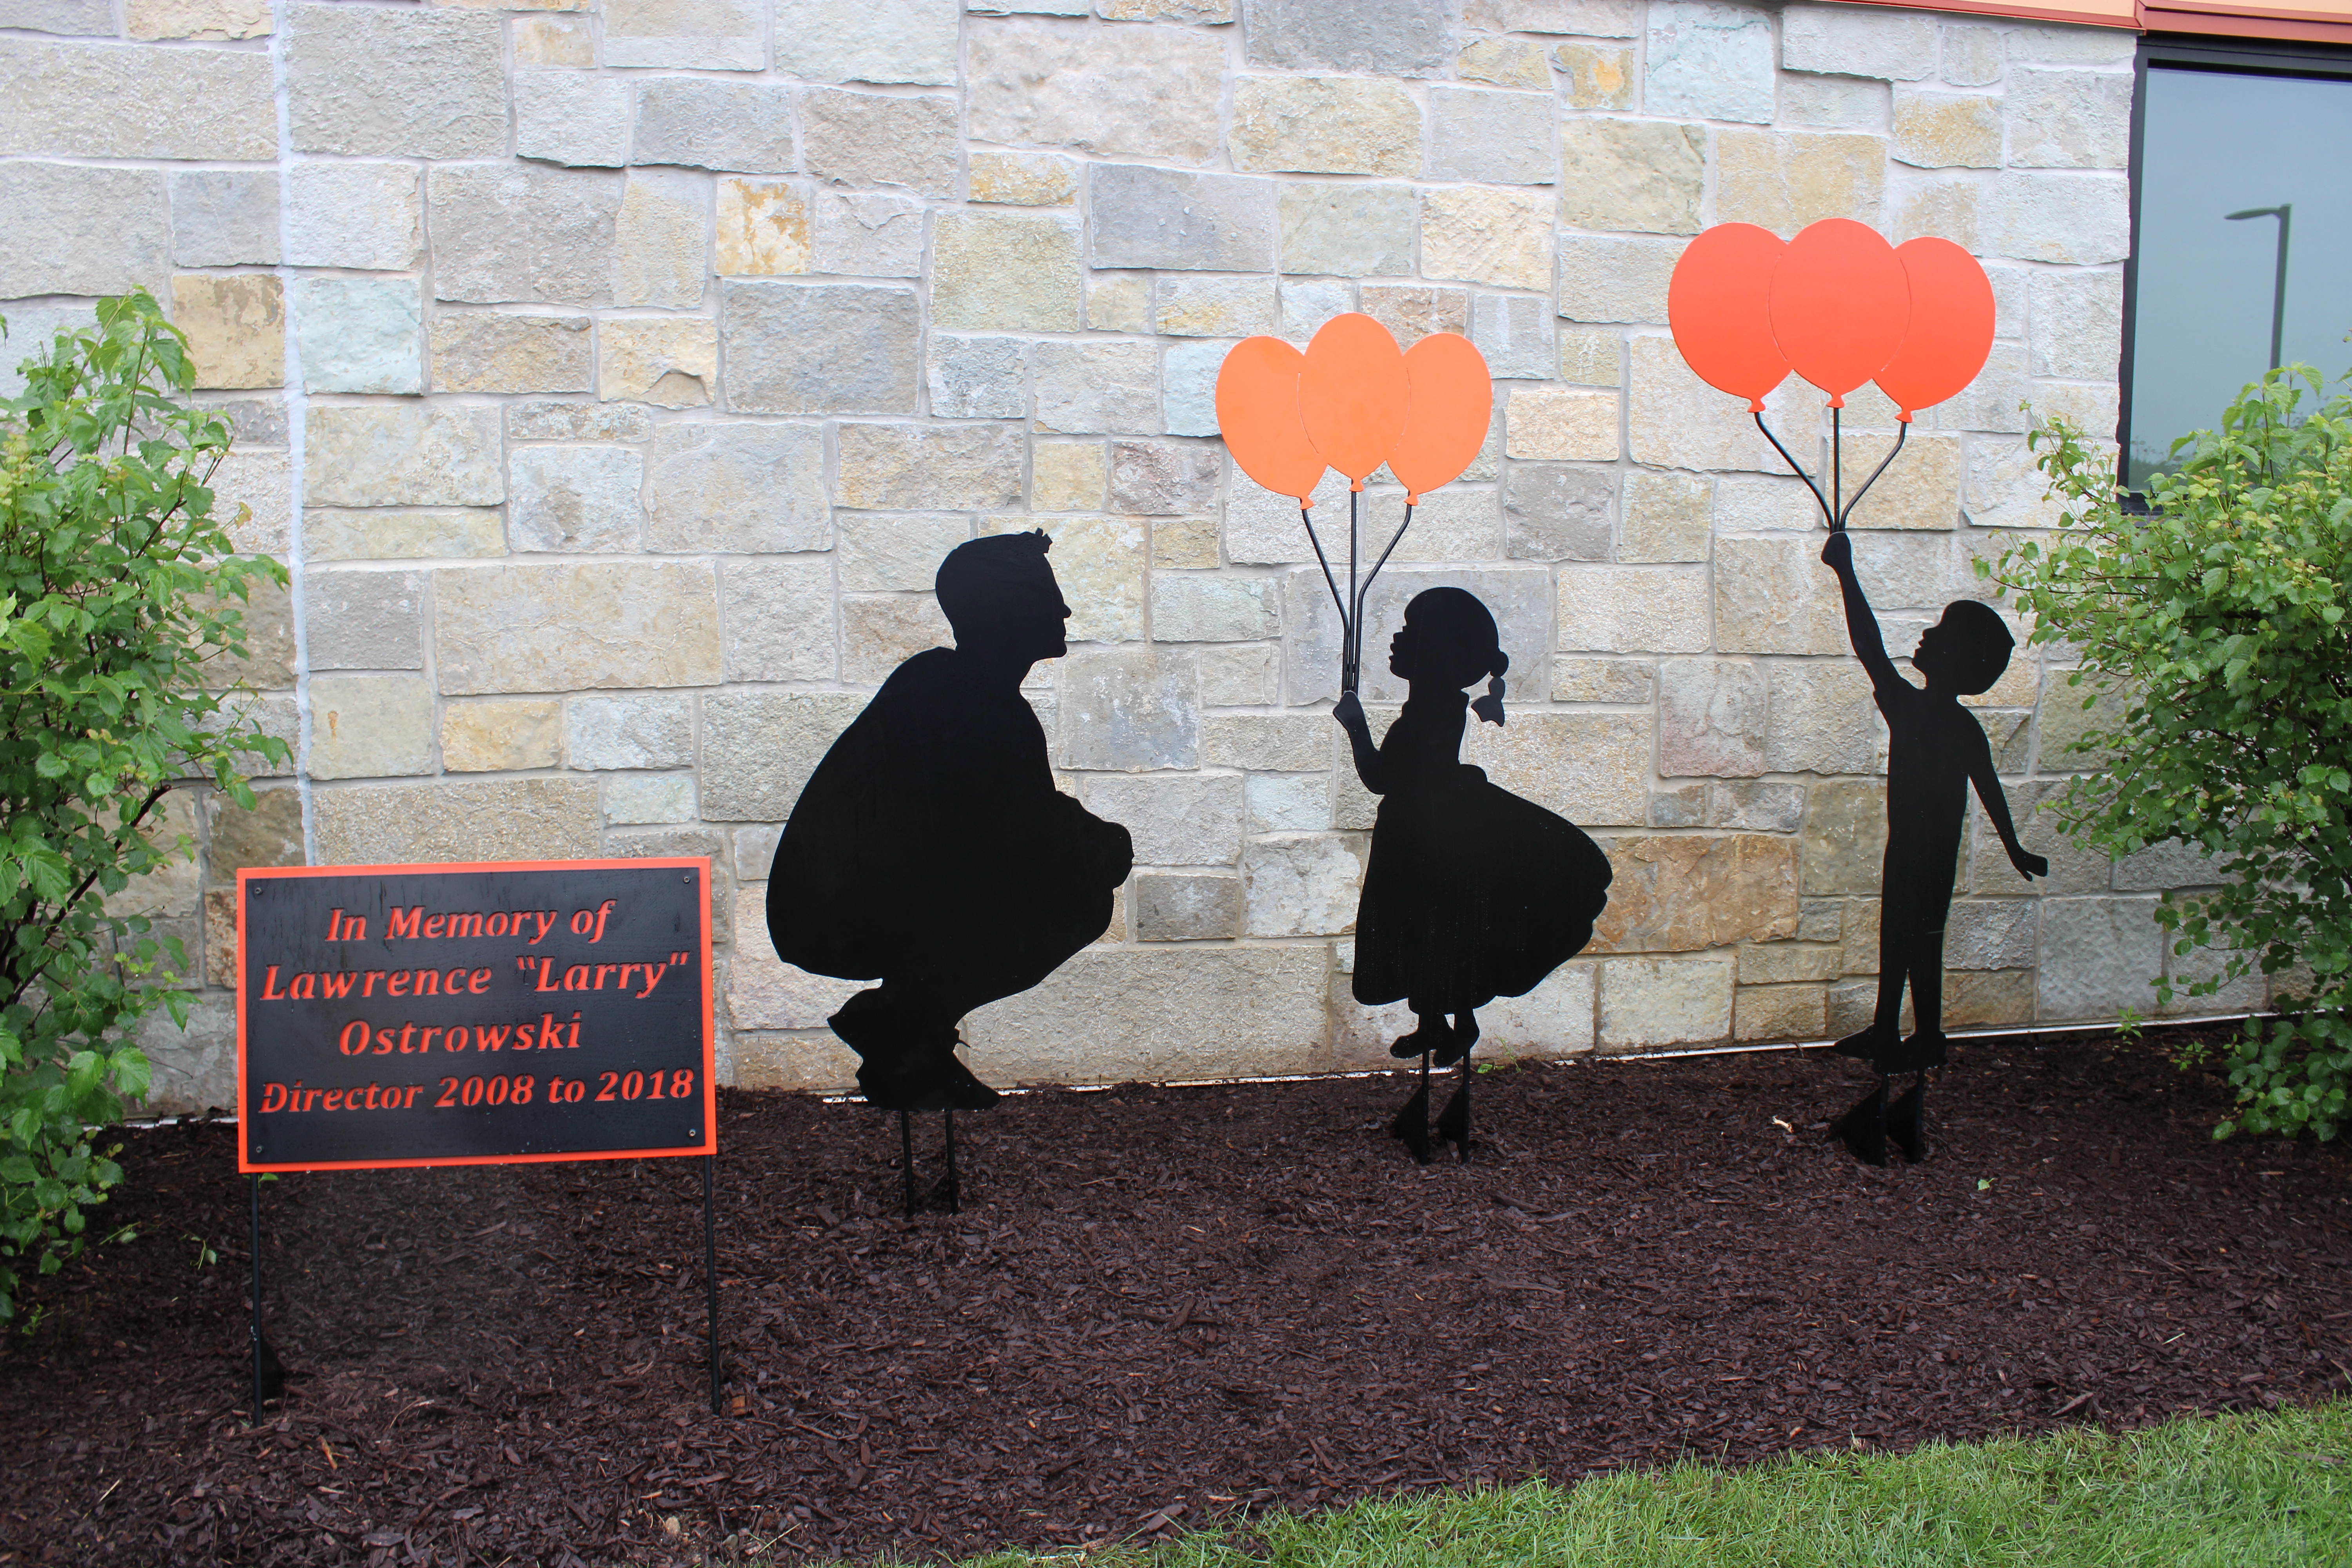 Image of memorial sculpture installation honoring former Library Director Larry Ostrowski